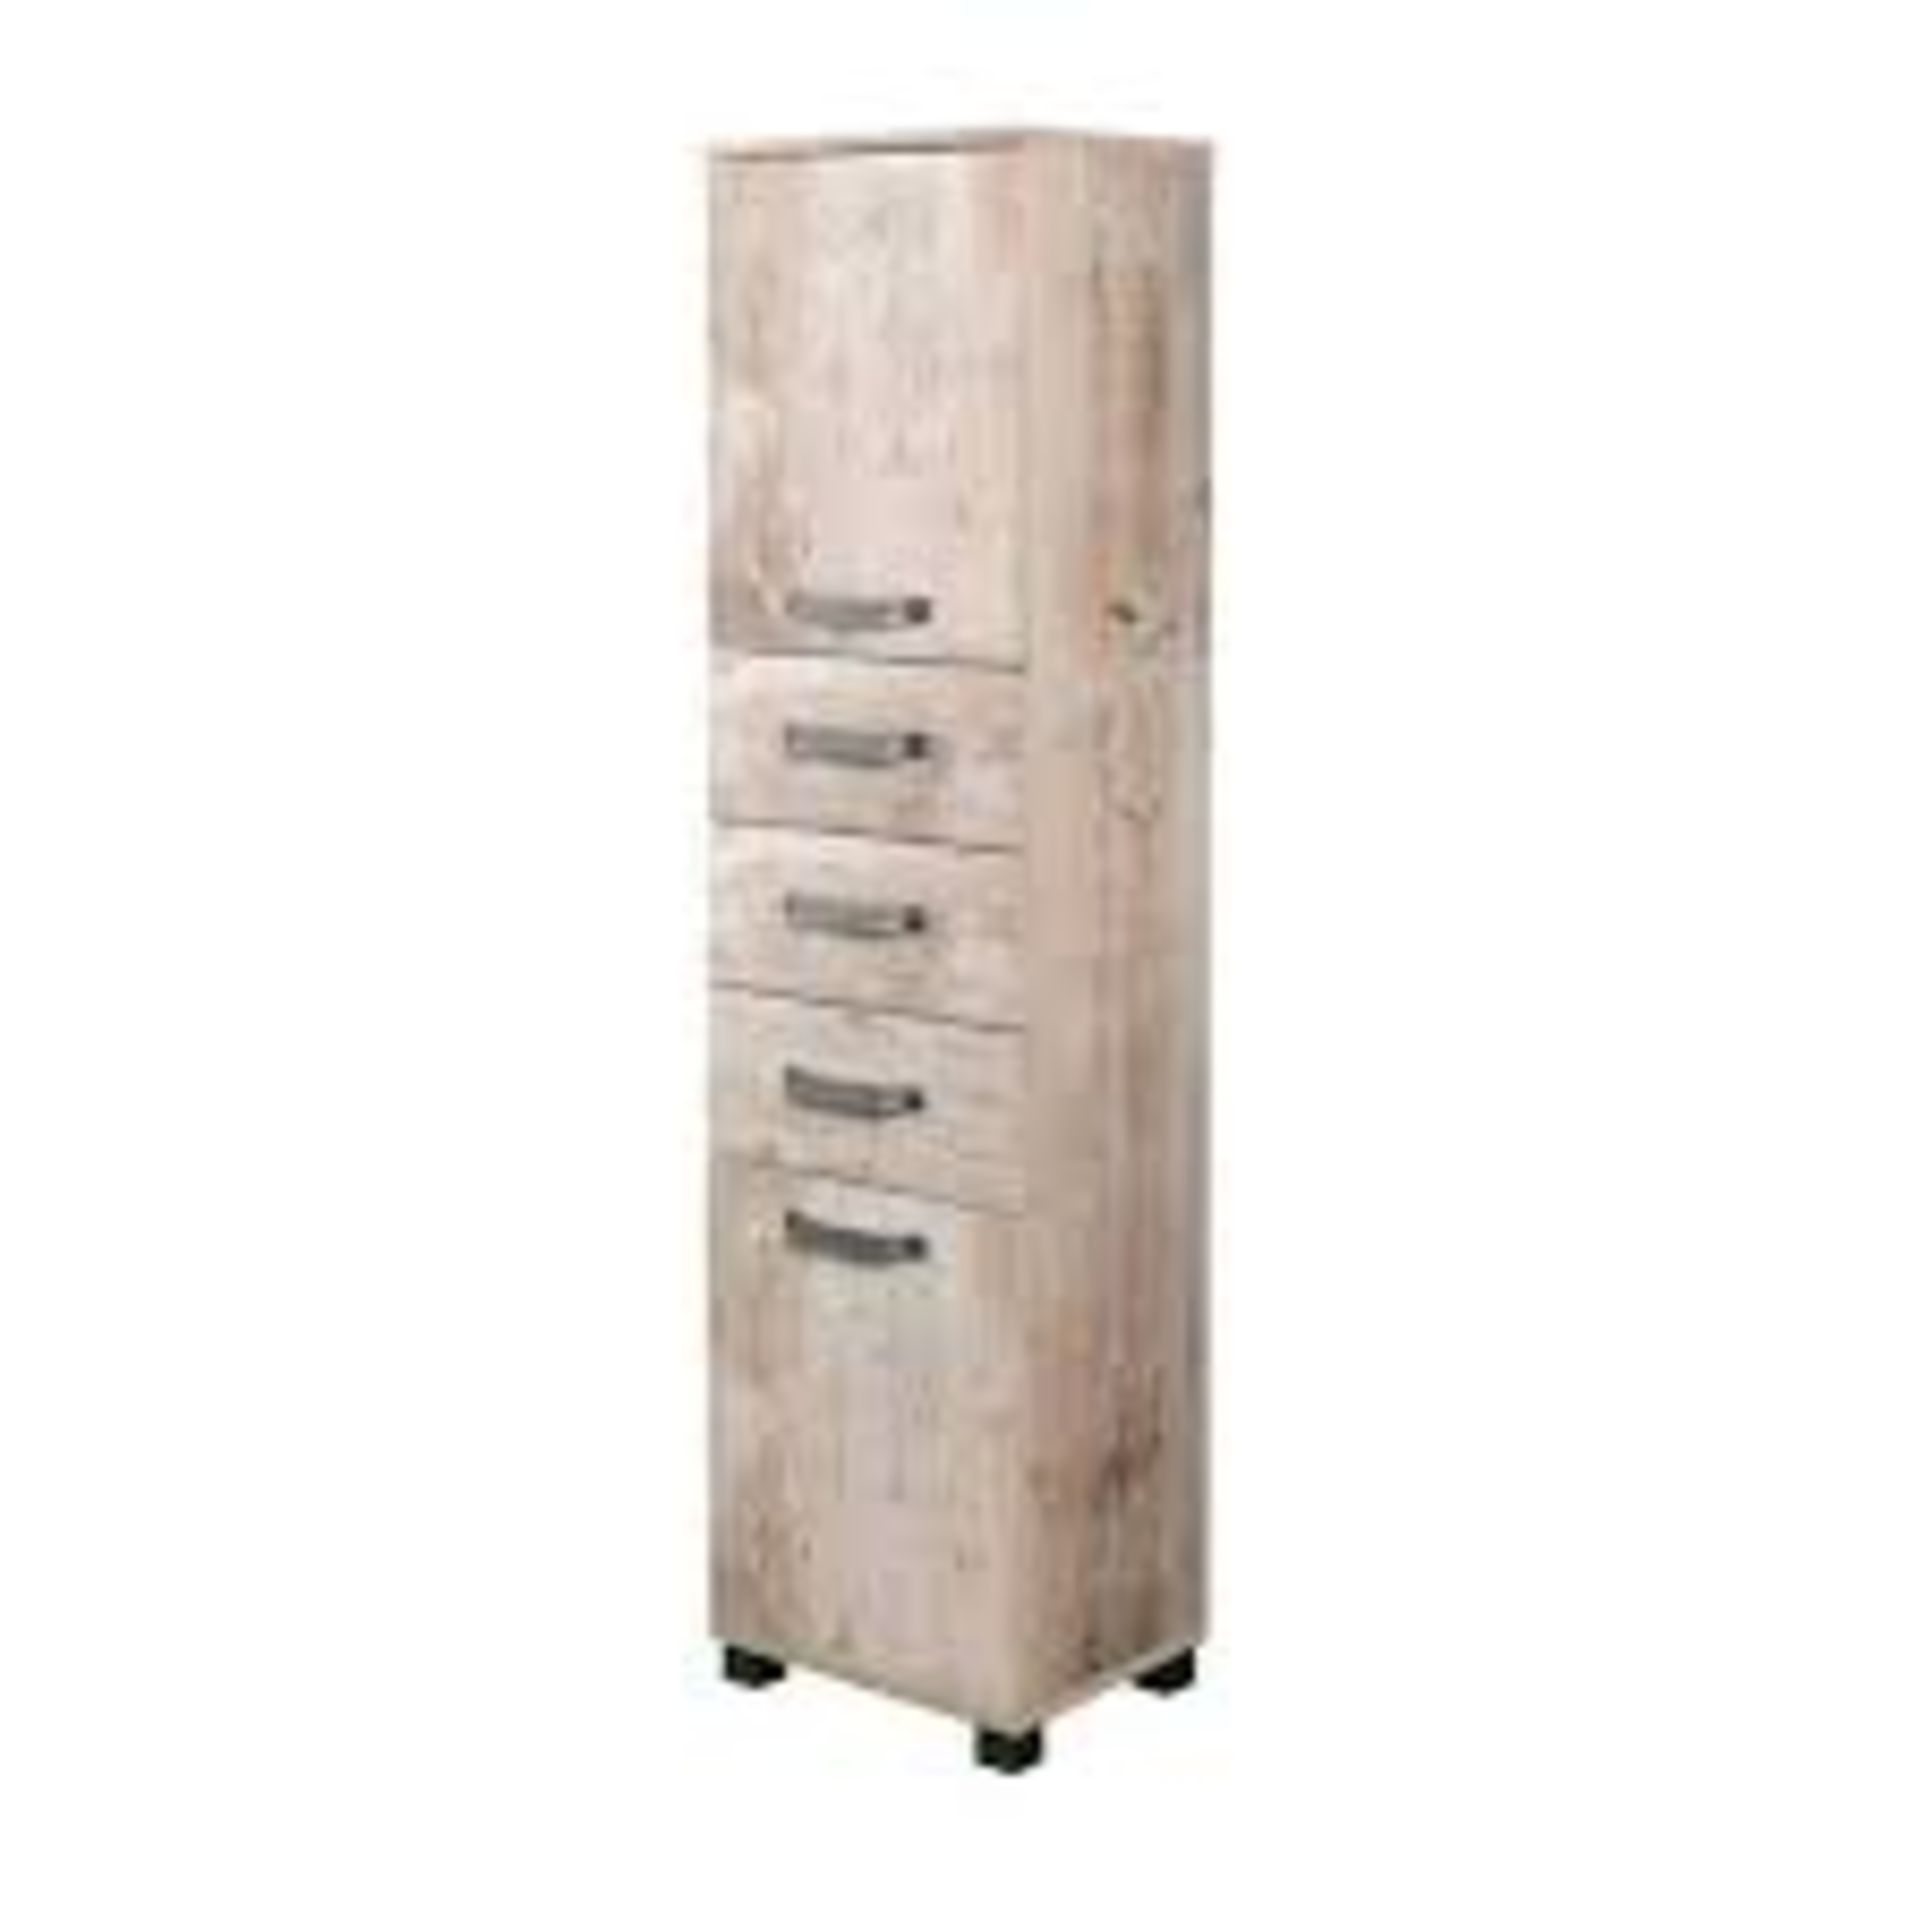 Boxed Borough Wharf 40 x 163.7cm Cabinet RRP £200 (18627) (Pictures Are For Illustration Purposes